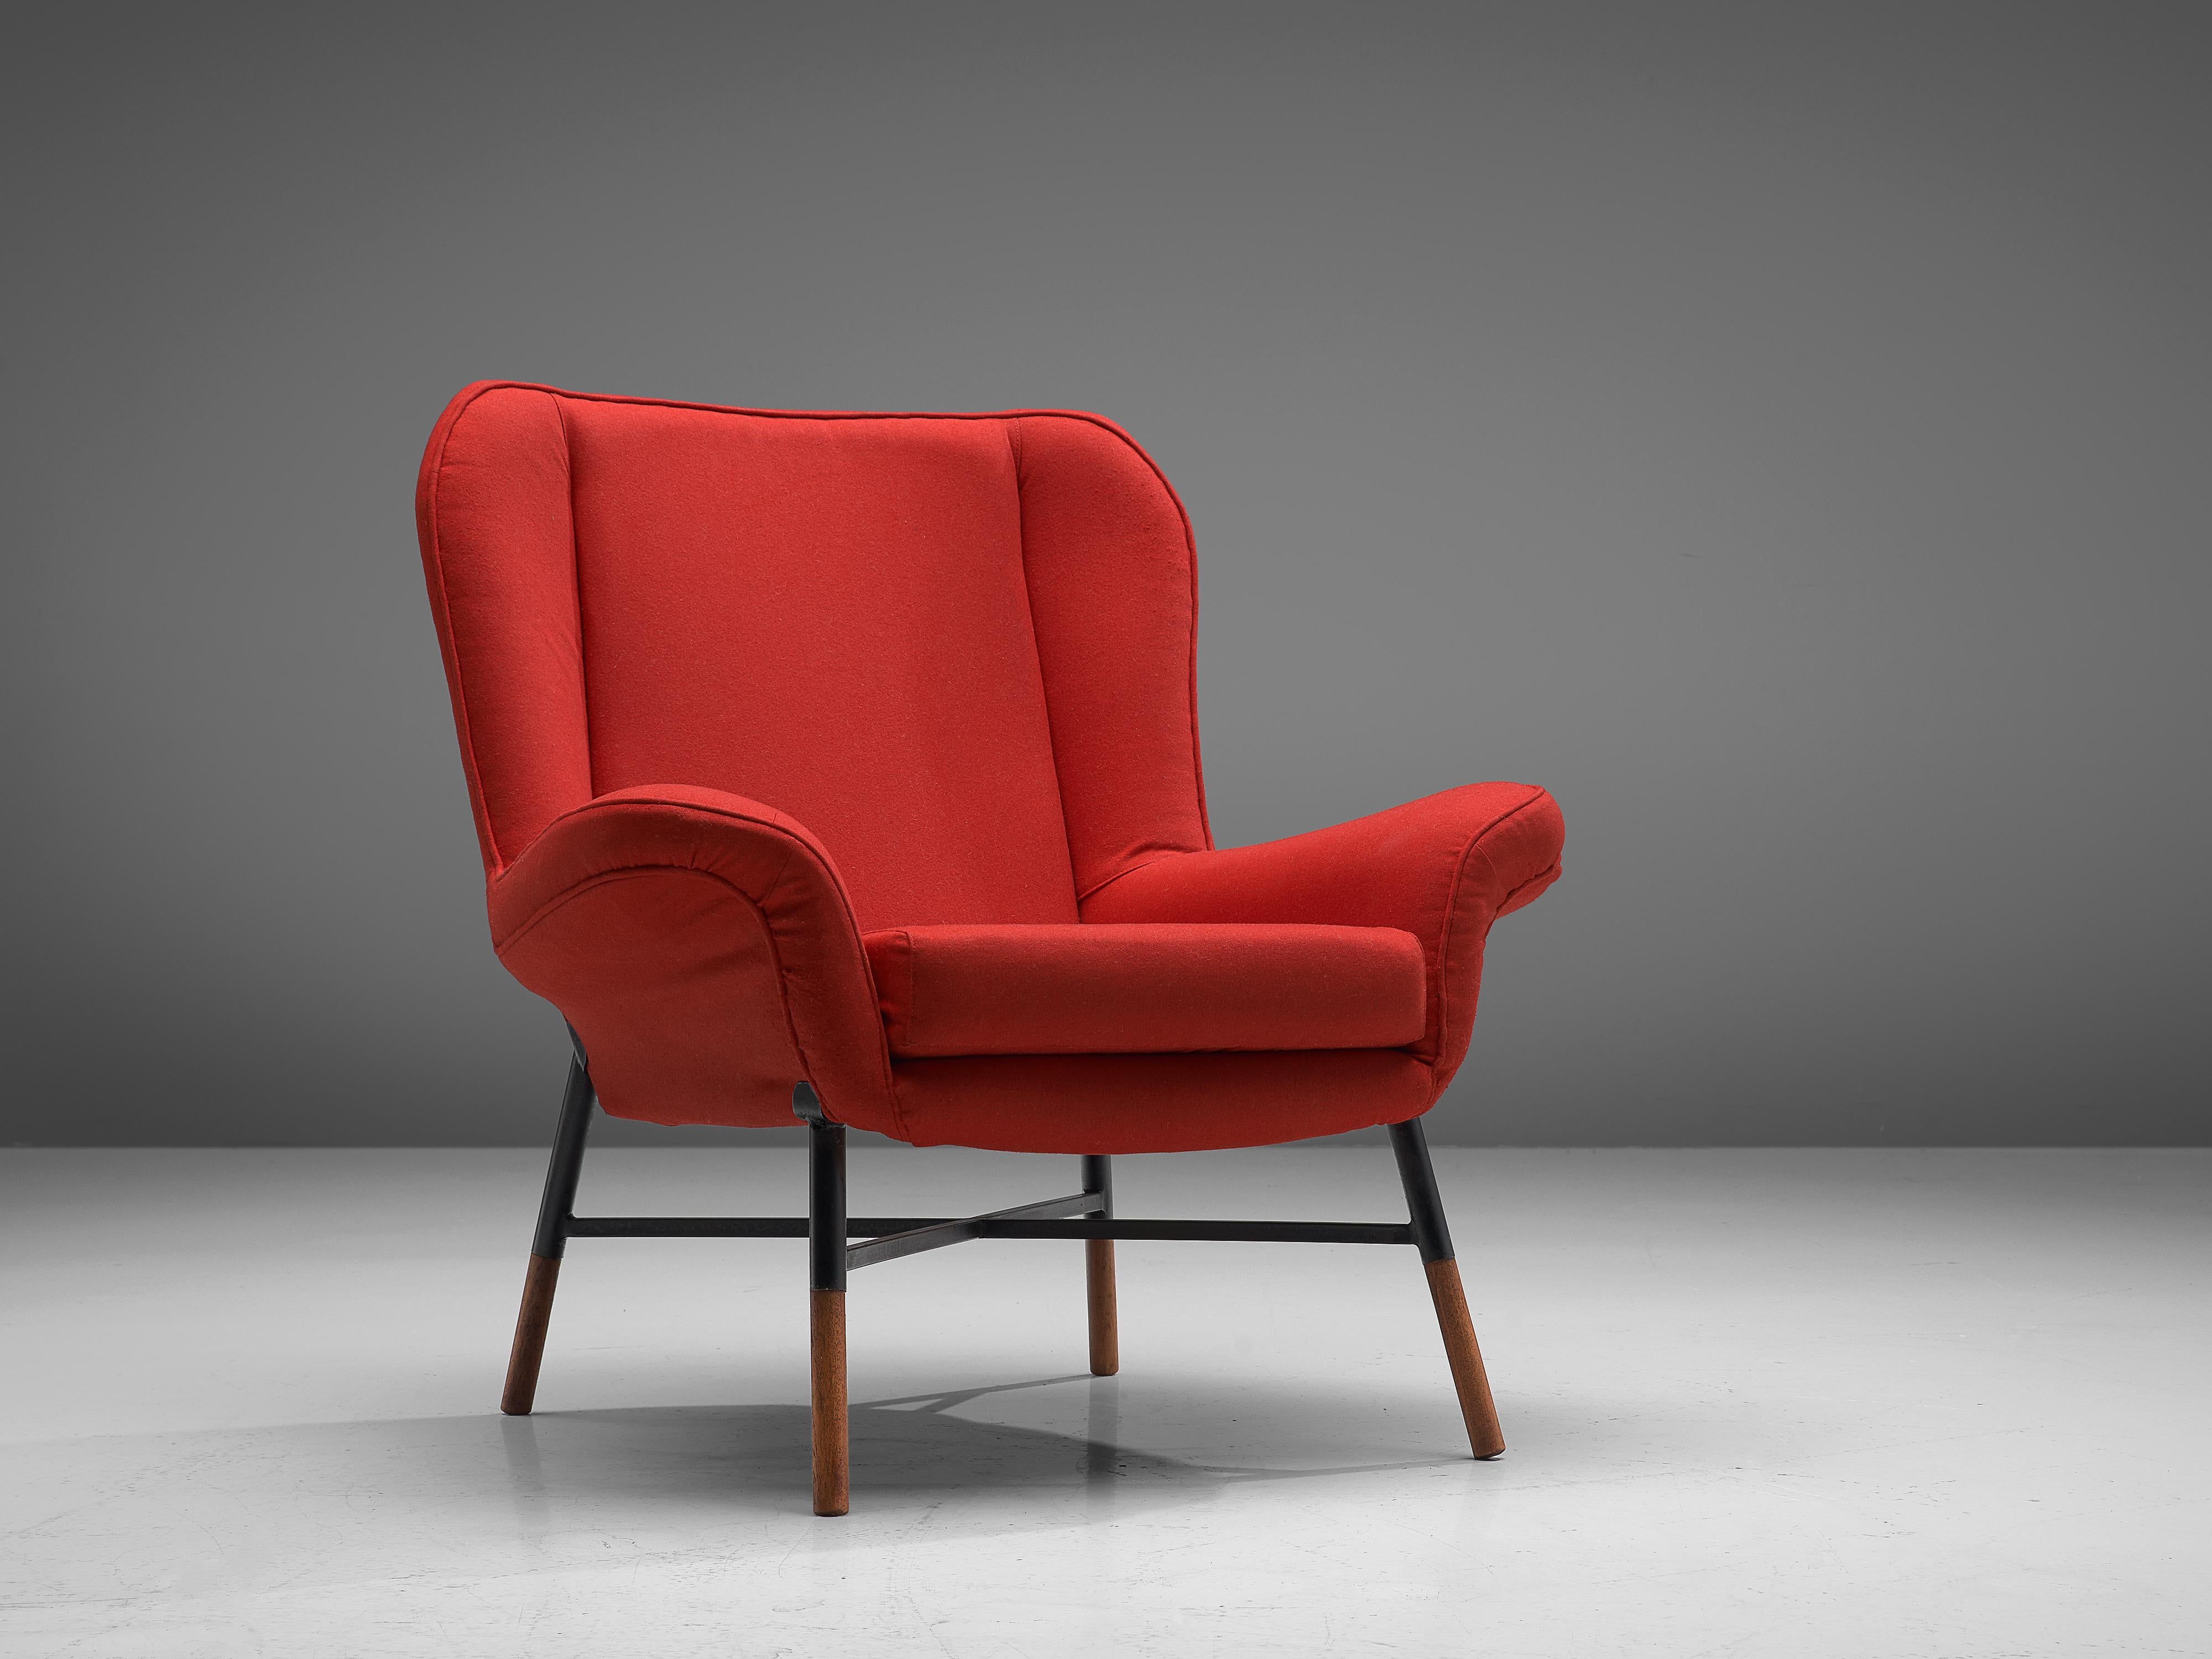 Studio BBPR for Arflex, 'Giulietta' lounge chair, red fabric, lacquered metal, wood, Italy, 1958

Begiojoso, Peressutti and Rogers of the B.B.P.R. design group designed this armchair named ‘Giulietta’ in 1958. The sculpted seat contains a high back